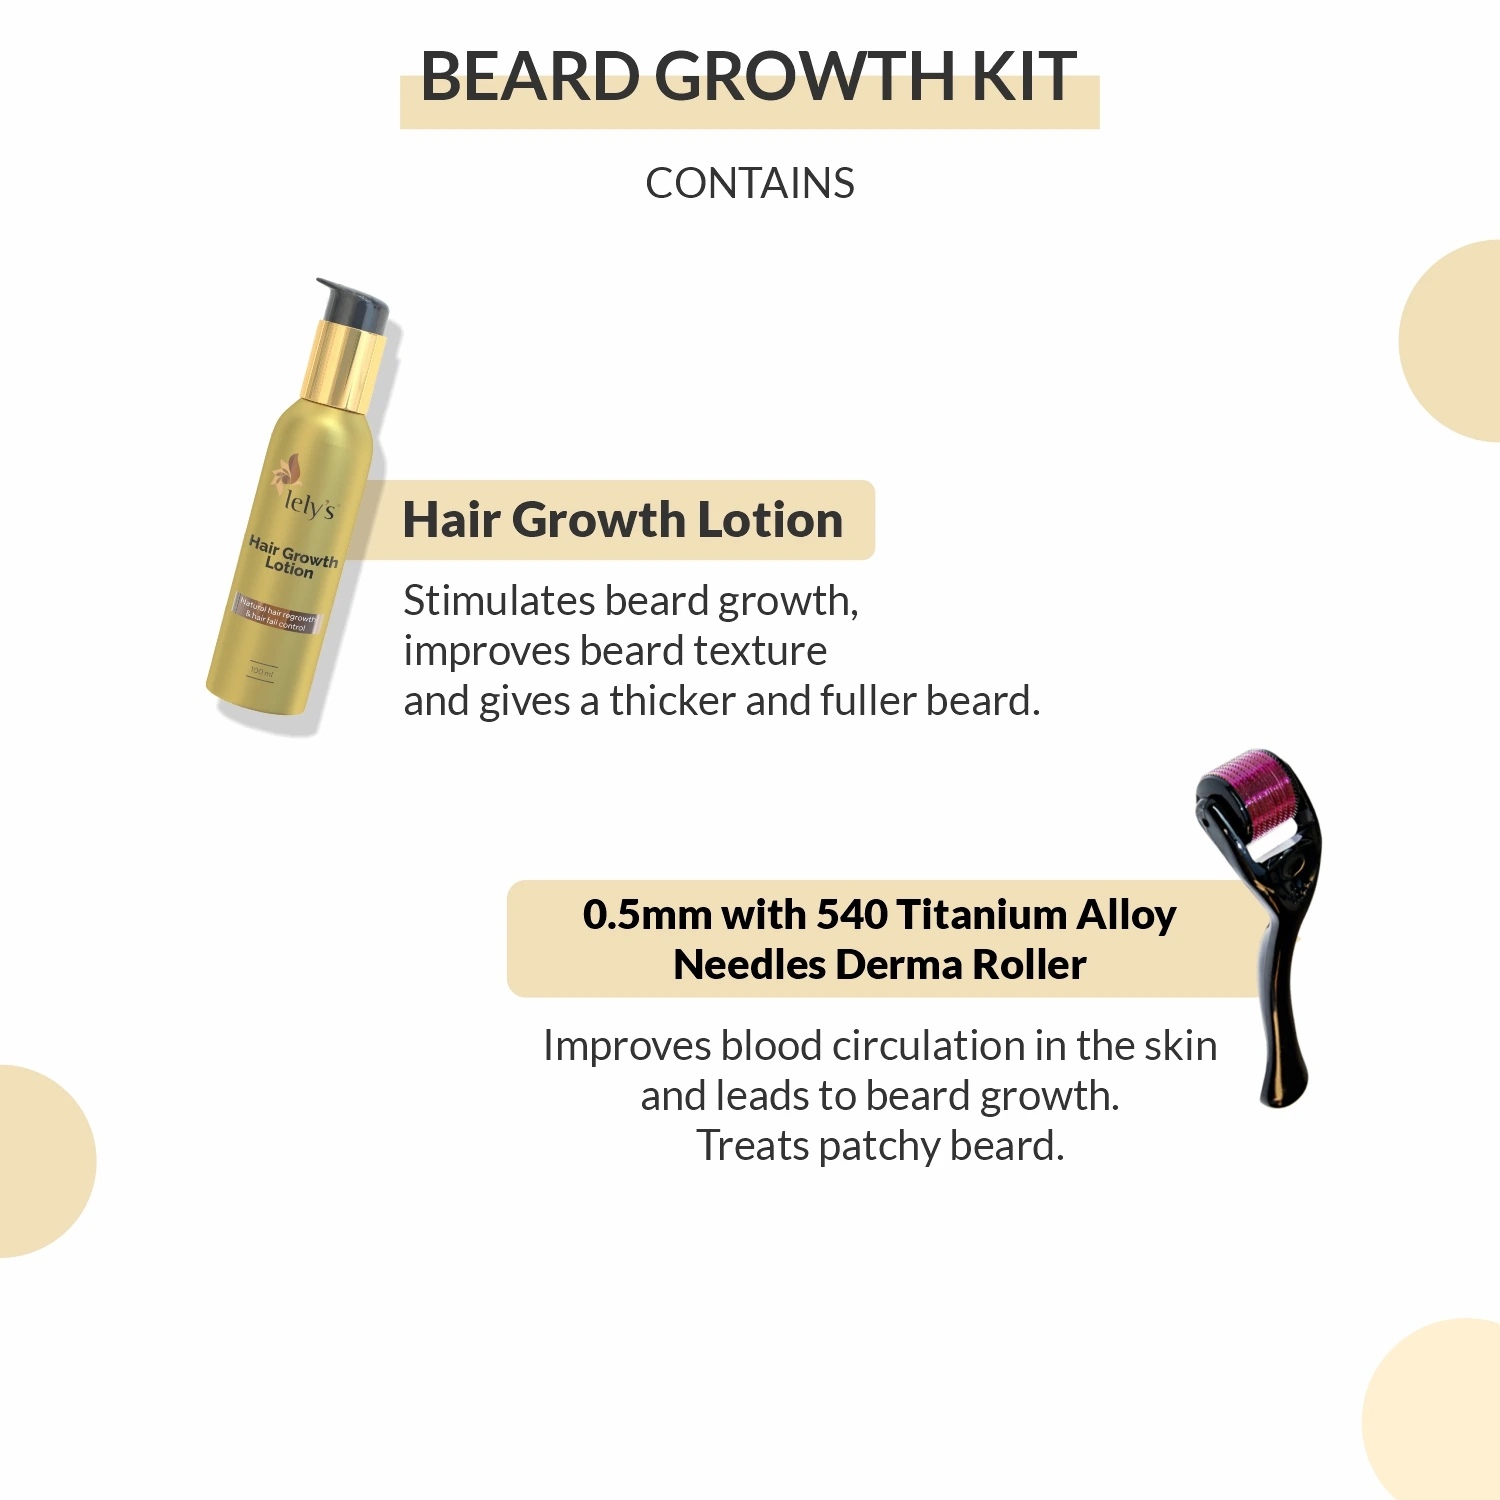 what does Beard Growth Kit Contains